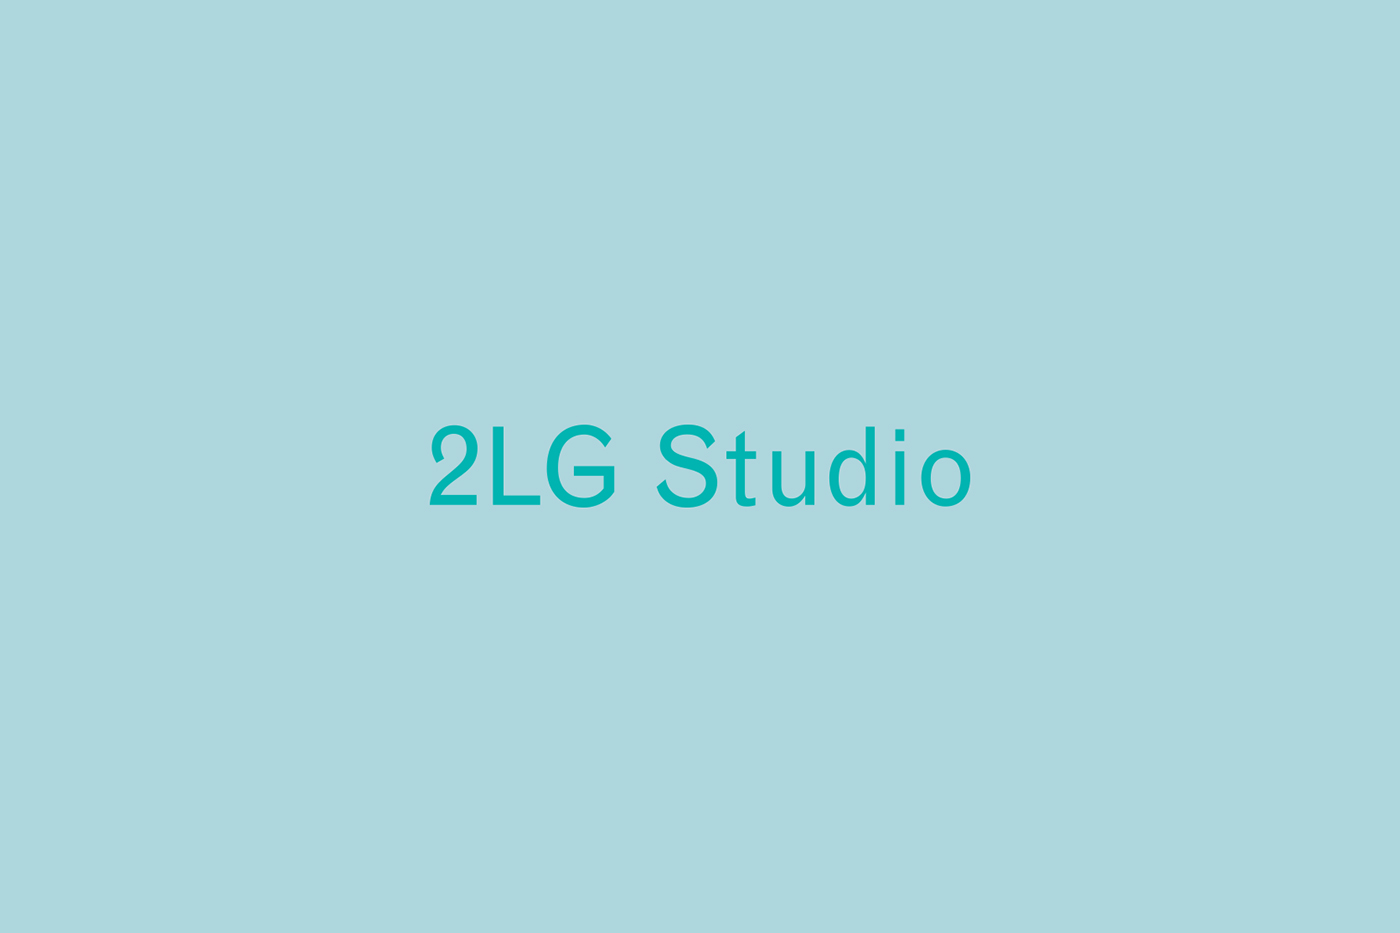 Logo, business cards and website by Two Times Elliott for London-based interior design studio 2LG